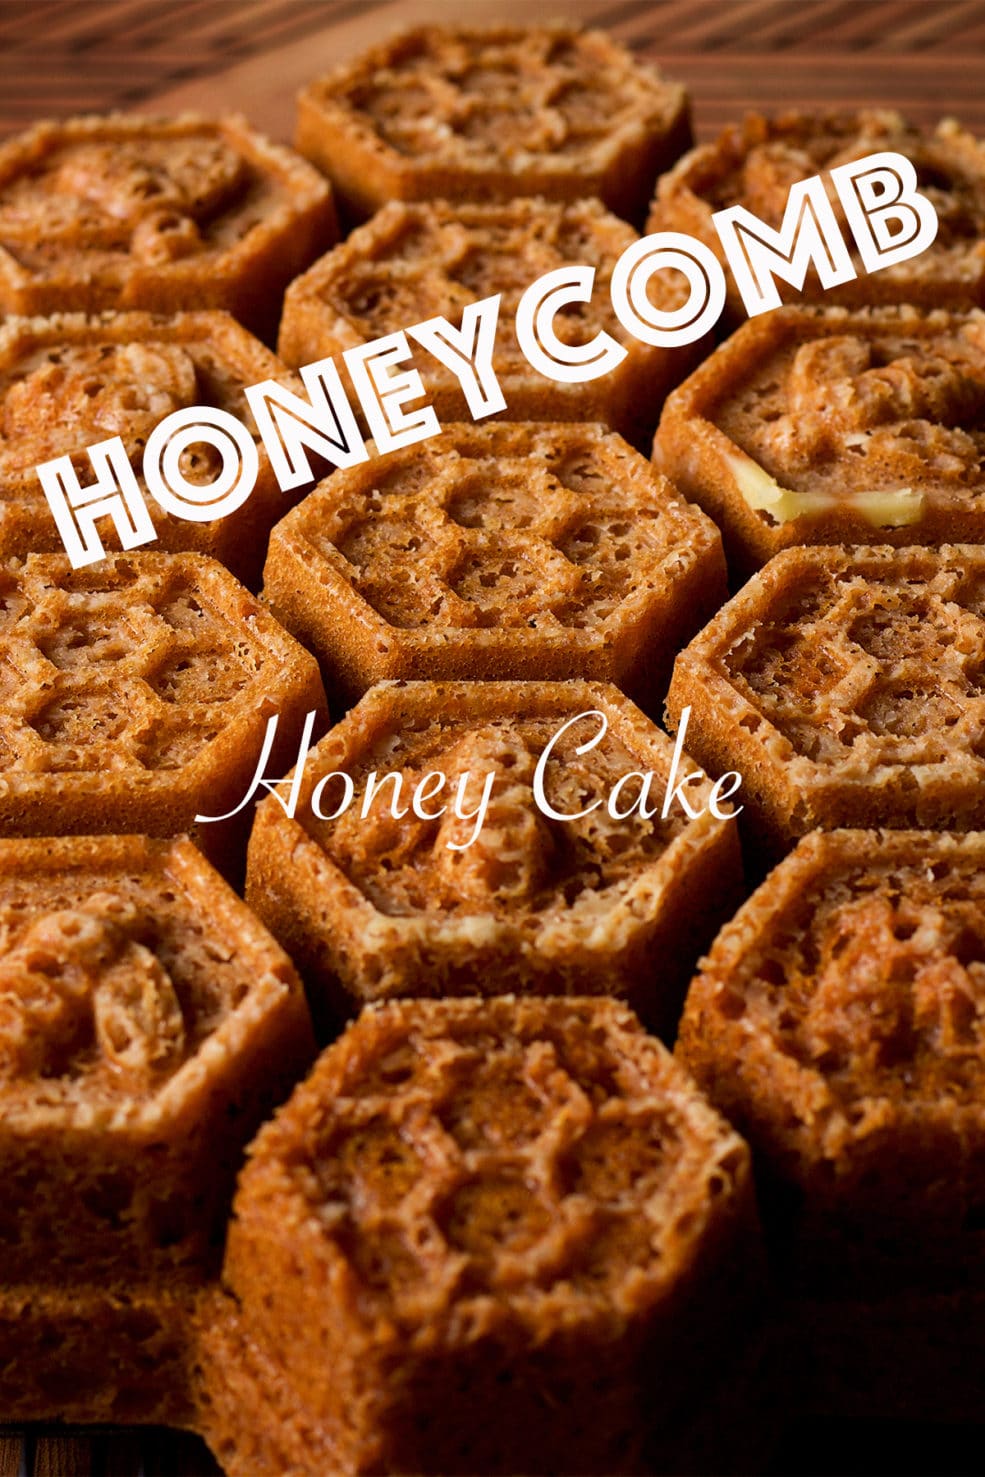 A freshly baked Honey Cake, baked in a Honeycomb Pan, on a wood serving tray.